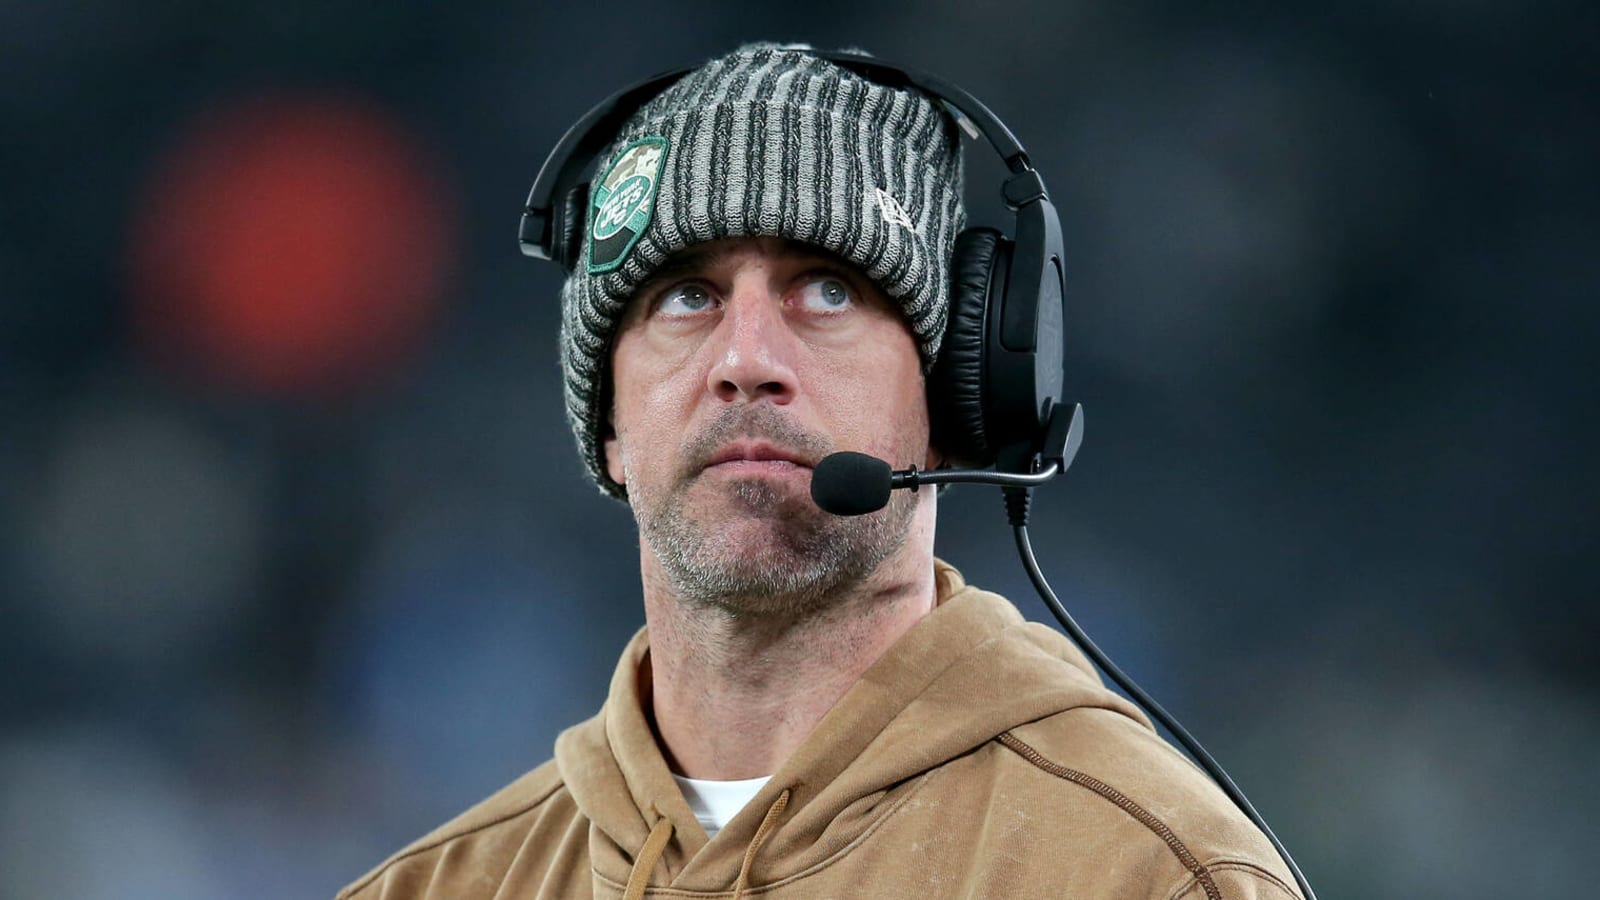 Aaron Rodgers hopes to give Jets fans early Christmas present